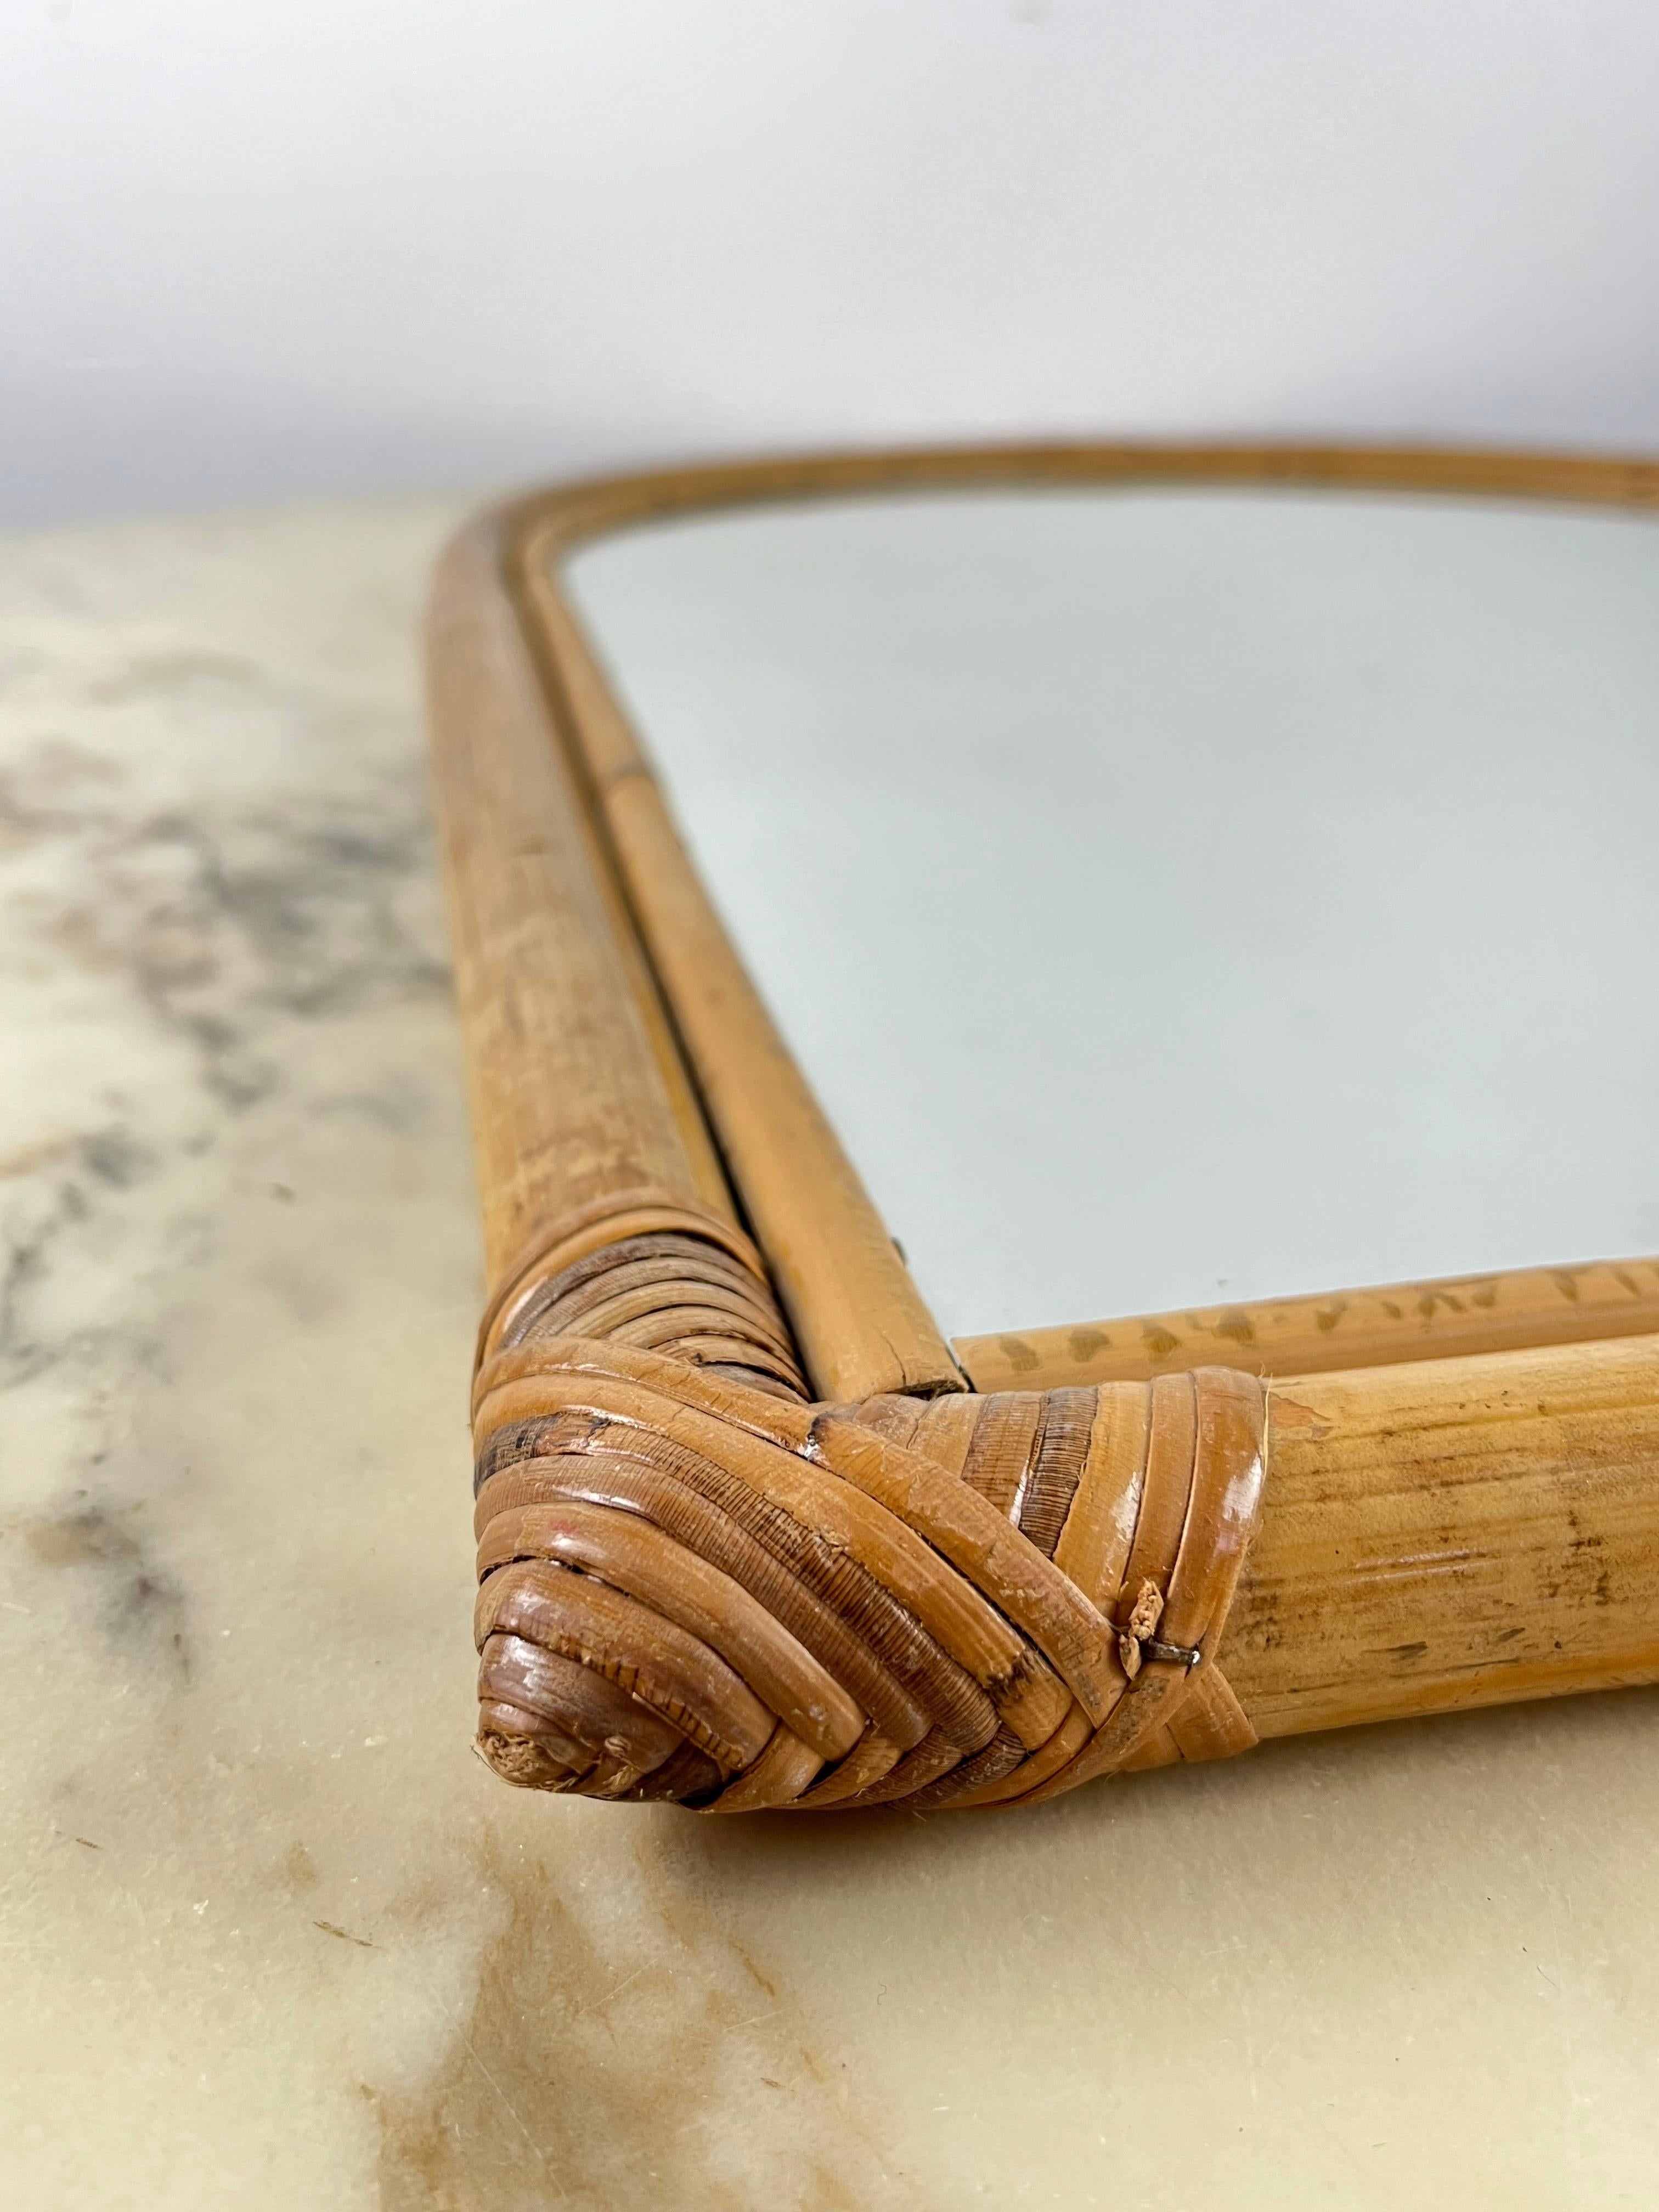 Vintage bamboo mirror, Italy, 1970s
Found in a villa in Taormina, a well-known Sicilian seaside resort.
It is in excellent condition, with small signs of aging.